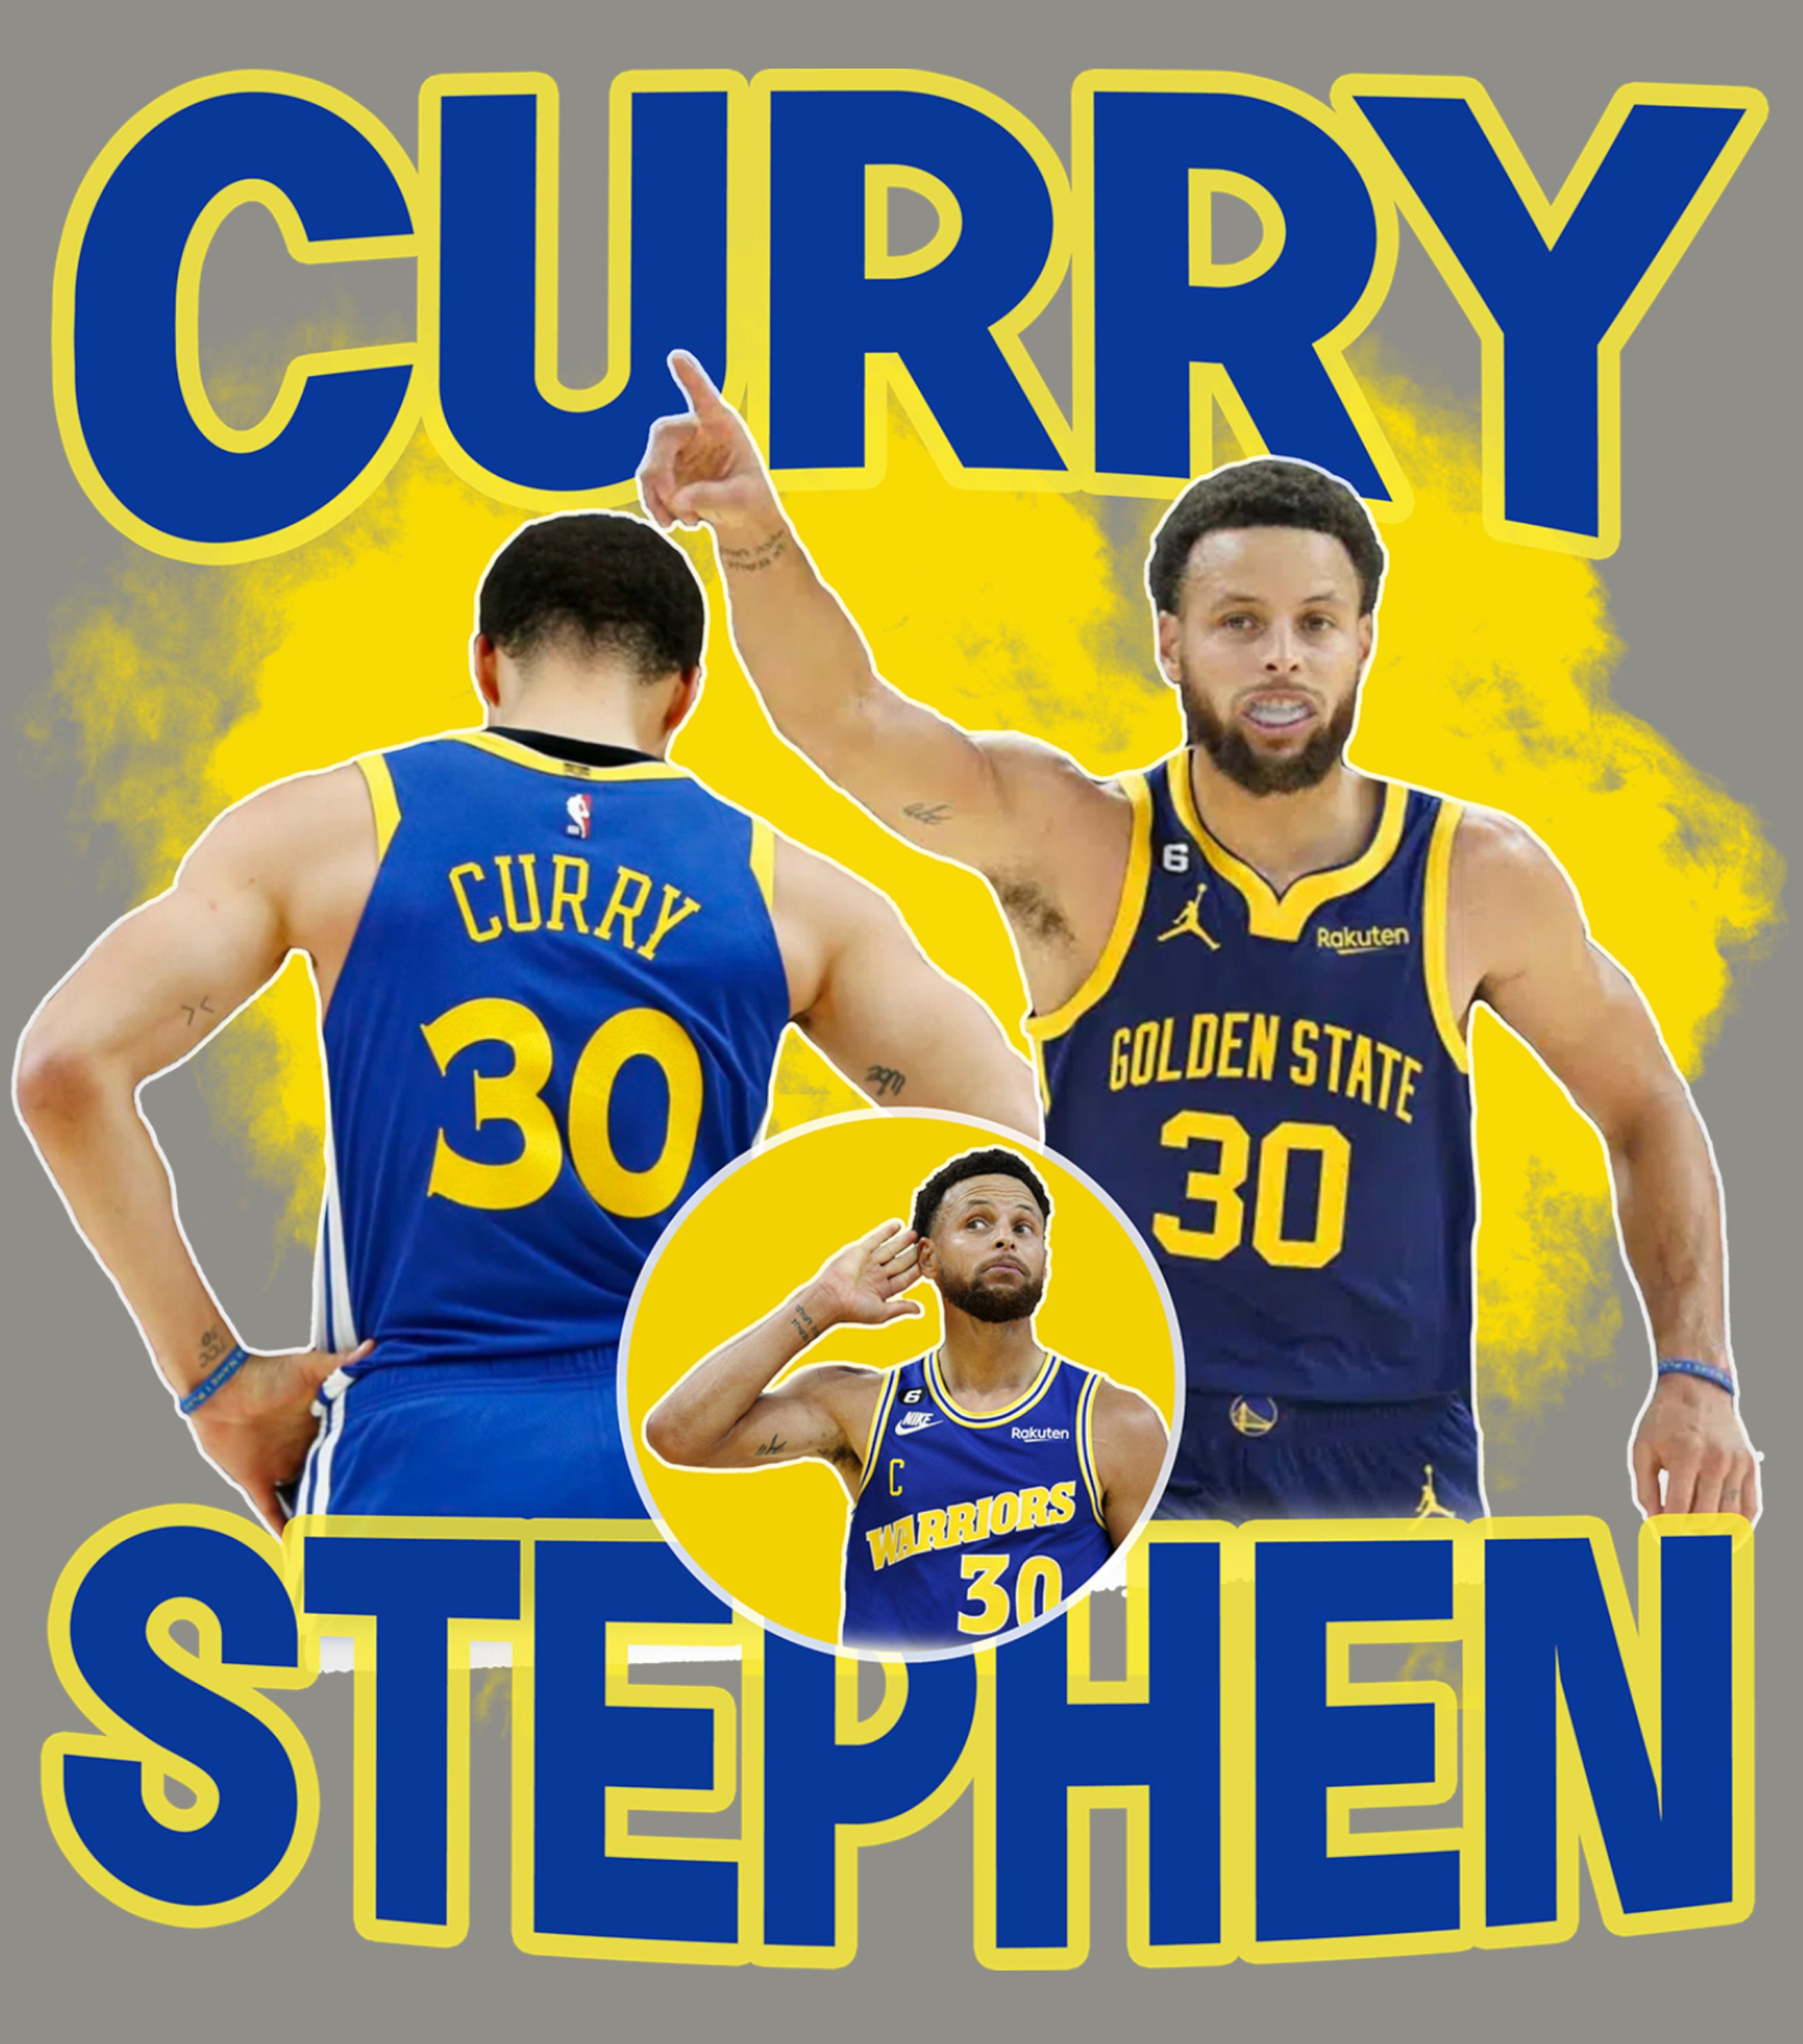 Steph Curry - Jersey Number 30 Wallpaper Download